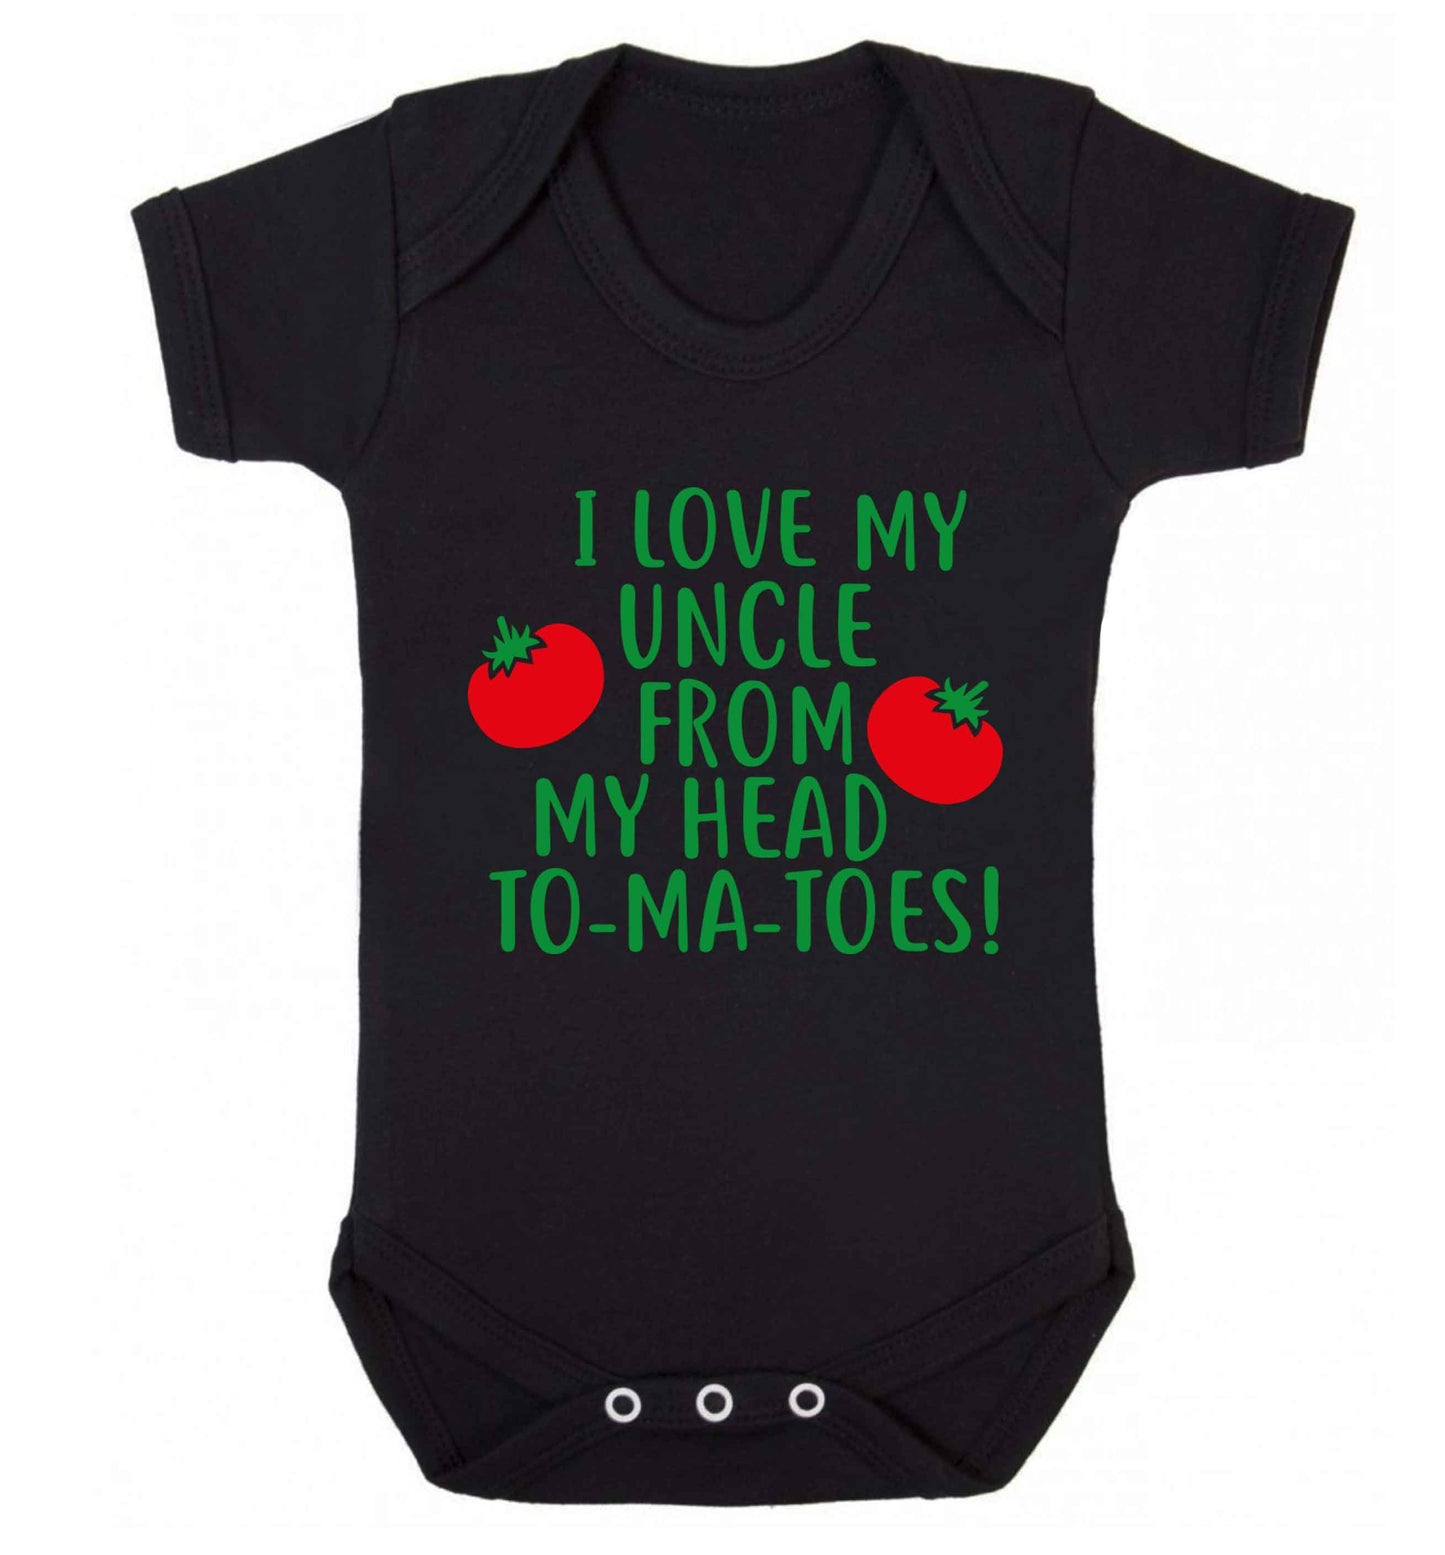 I love my uncle from my head To-Ma-Toes Baby Vest black 18-24 months